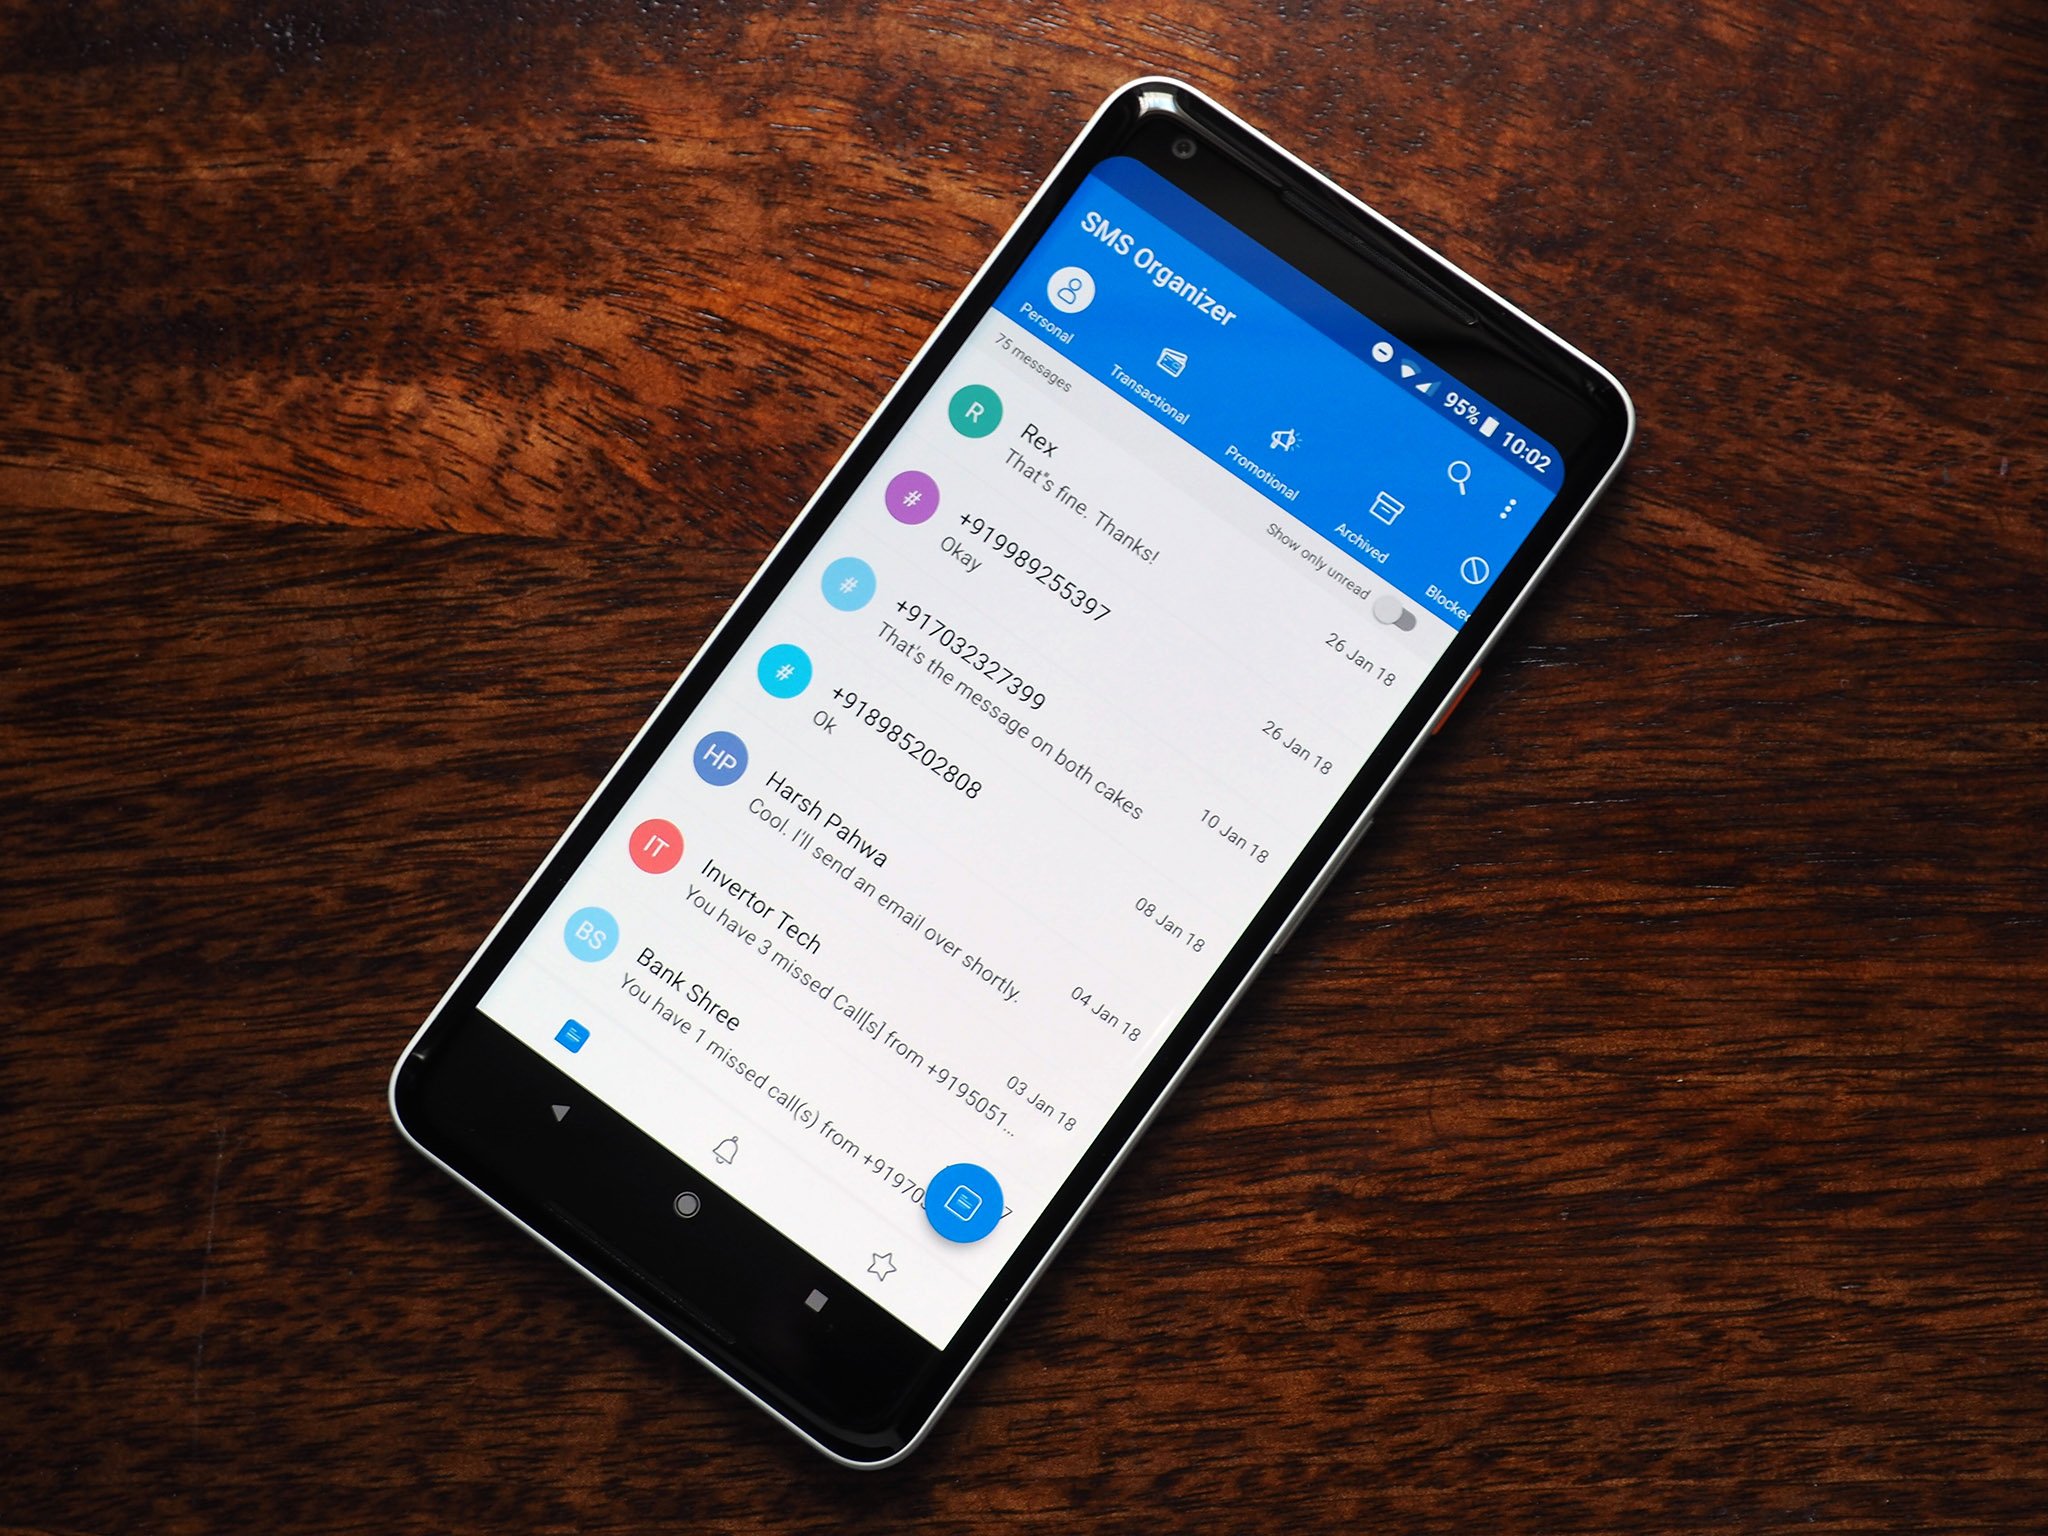 Microsoft starts rolling out another new Android app, SMS Organizer